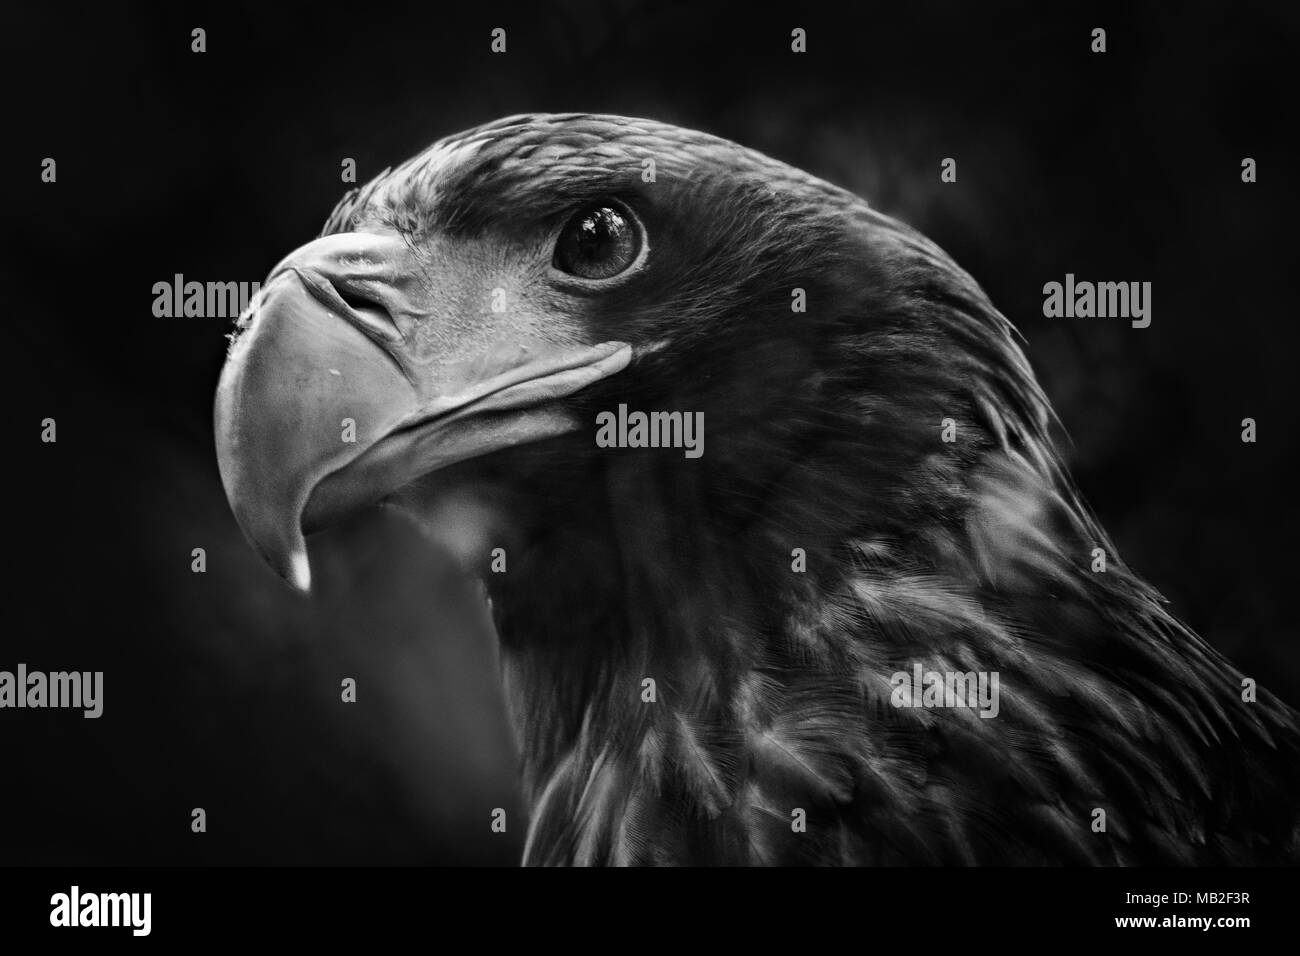 Portrait of a Steller's sea eagle close up in black and white Stock Photo